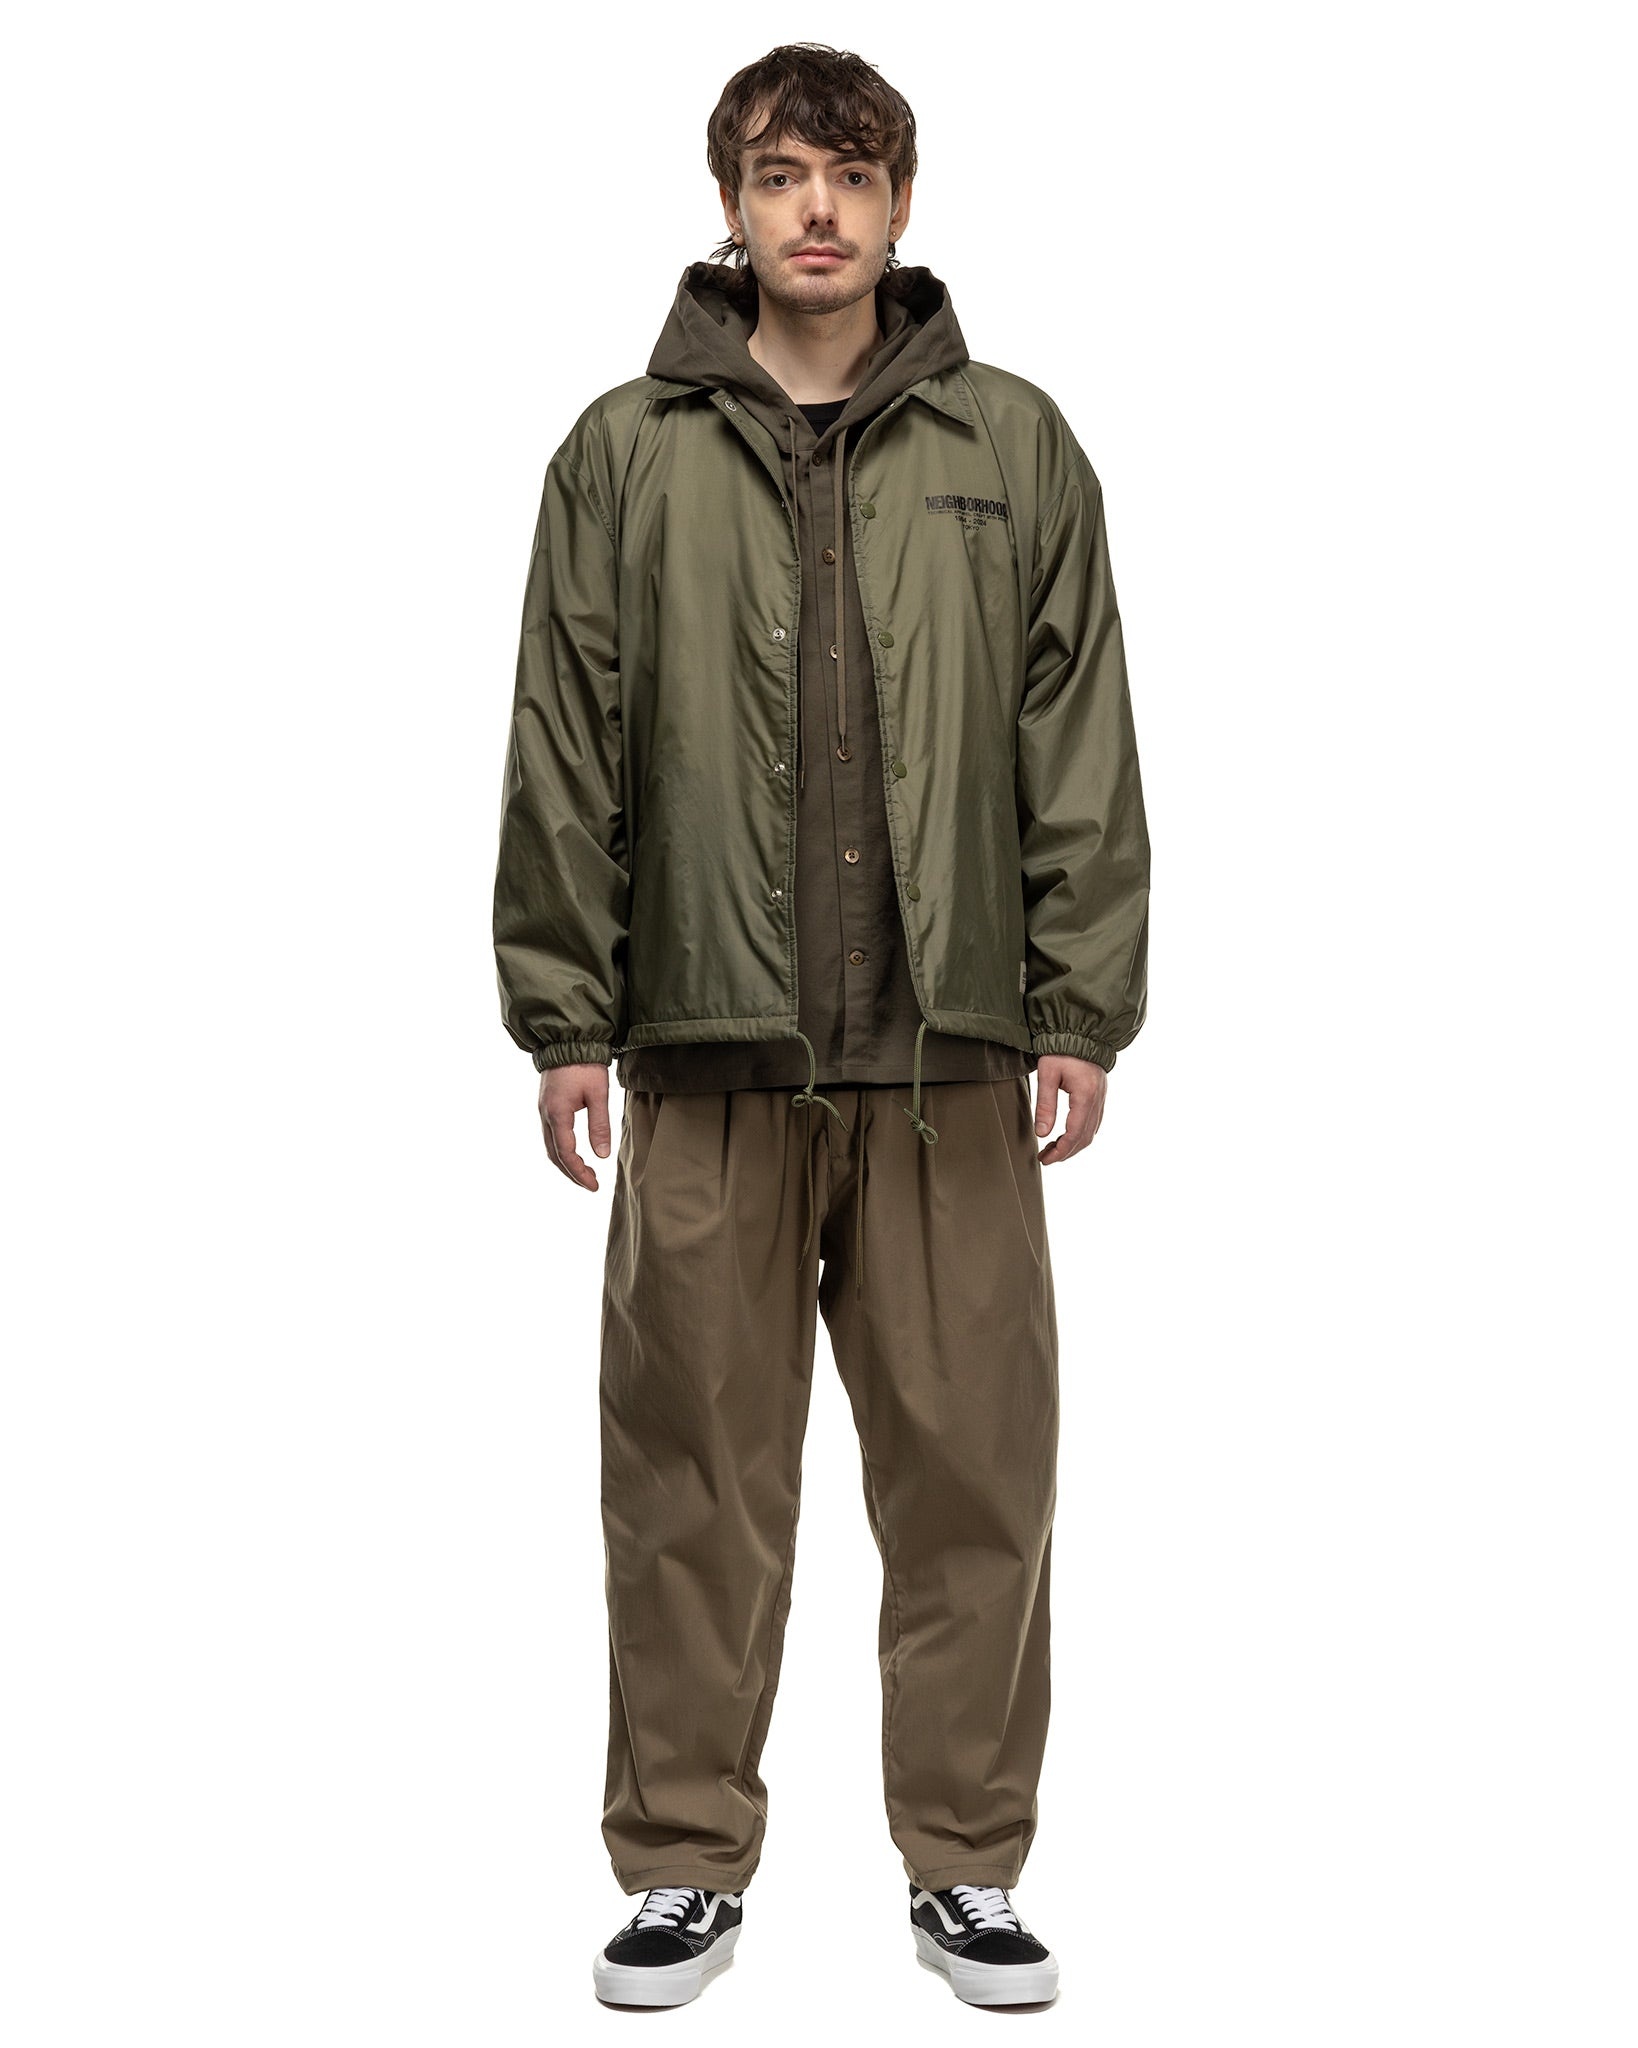 Baggysilhouette Easy Pants Olive Drab - 2